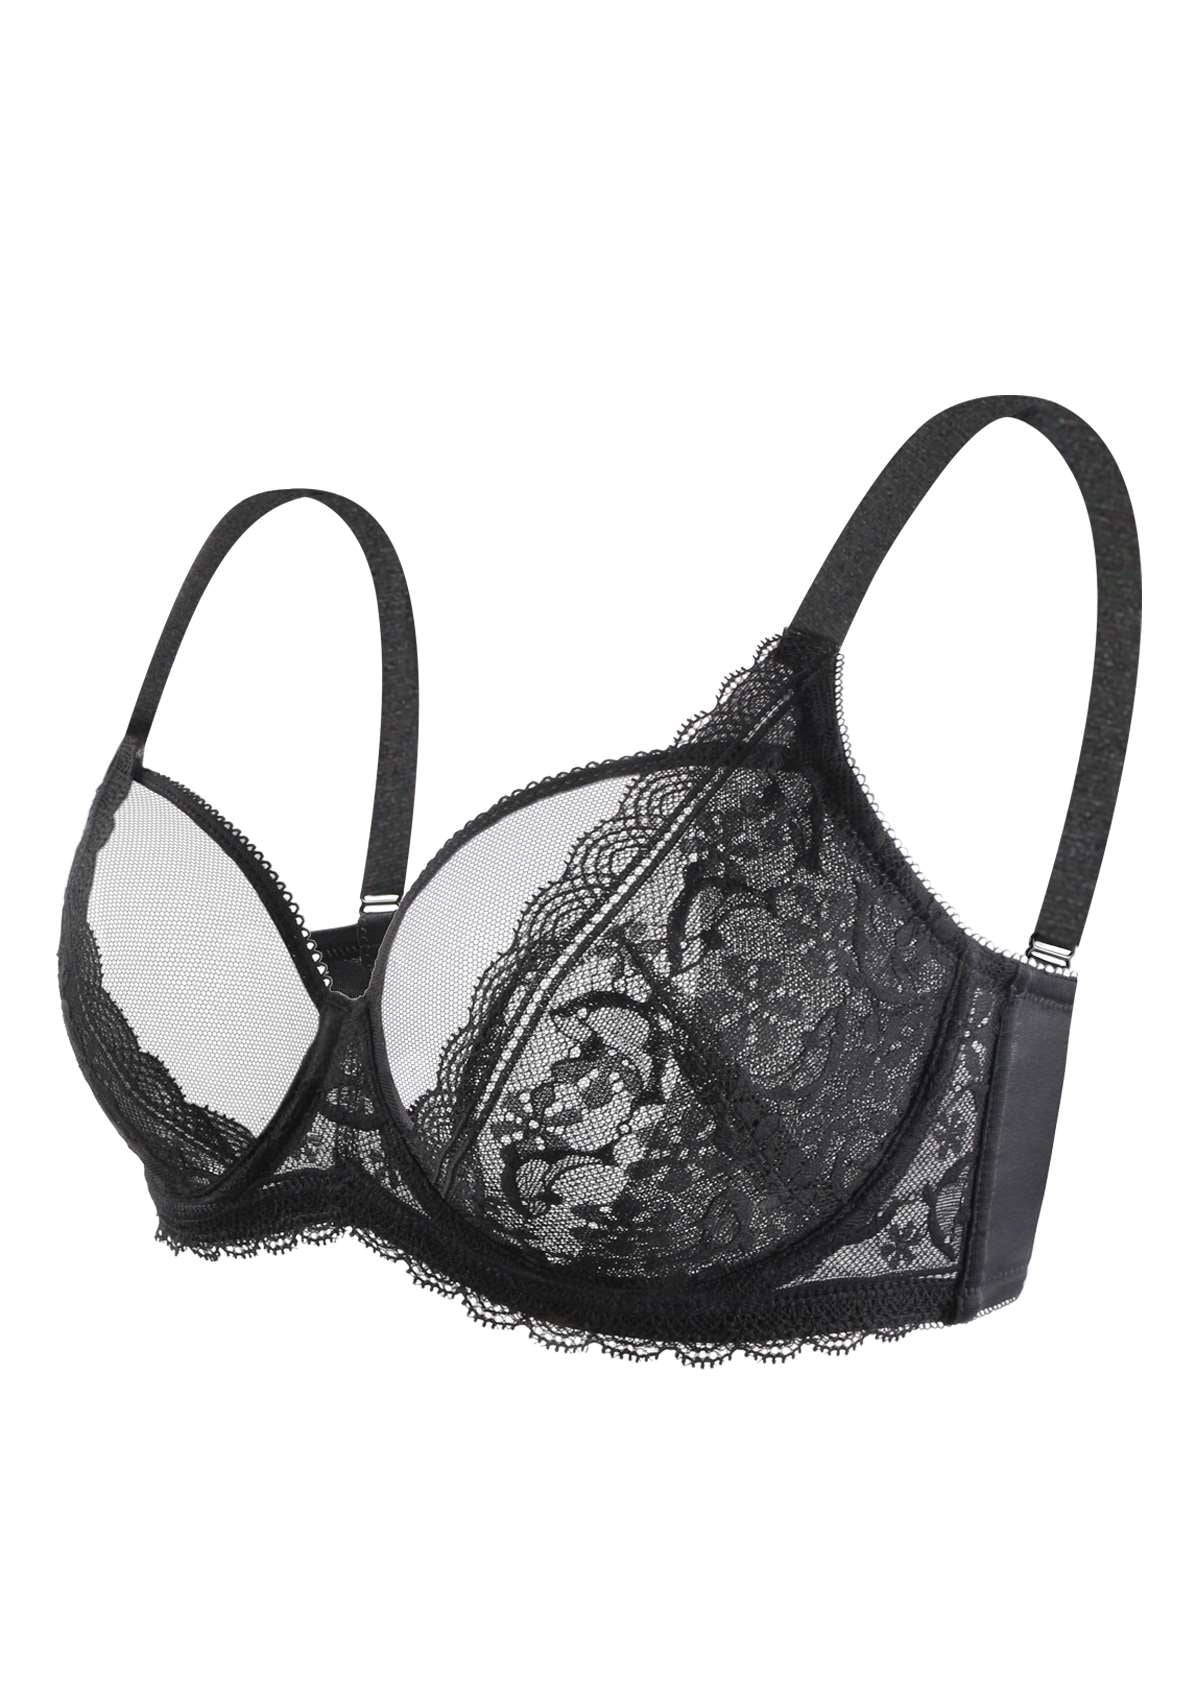 HSIA Anemone Lace Bra And Panties: Back Support Wired Bra - Black / 36 / DDD/F